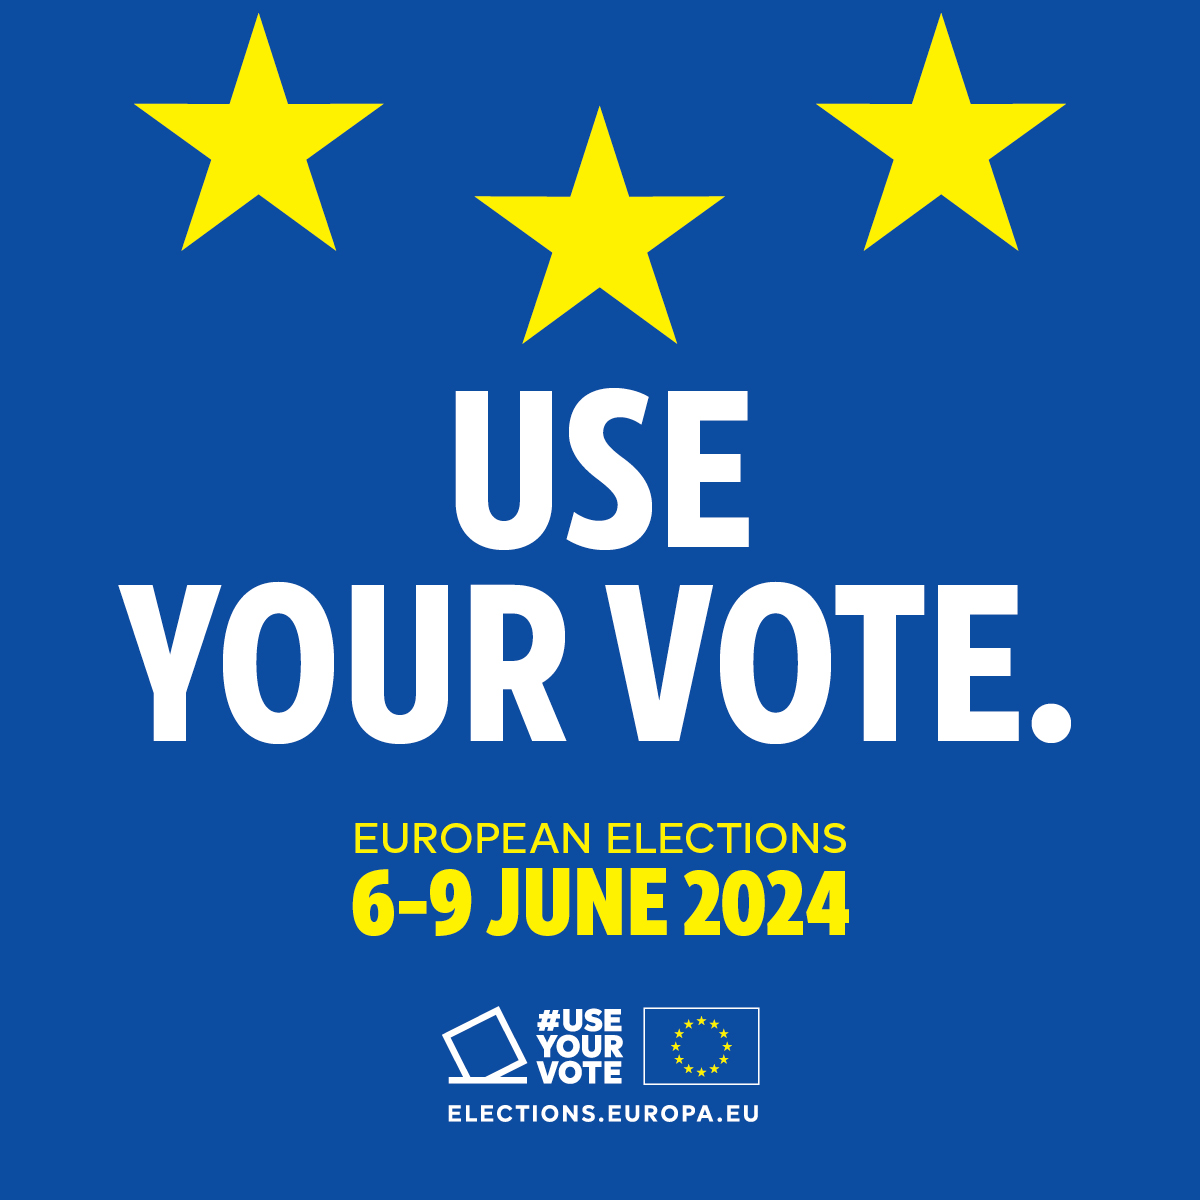 We work for those who cure diseases. Our ability to carry out this work depends on internationalism. We are proud to exercise our rights in the EU elections & will vote to support international collaboration. More: europawahl.eu #UseYourVote #NutzeDeineStimme